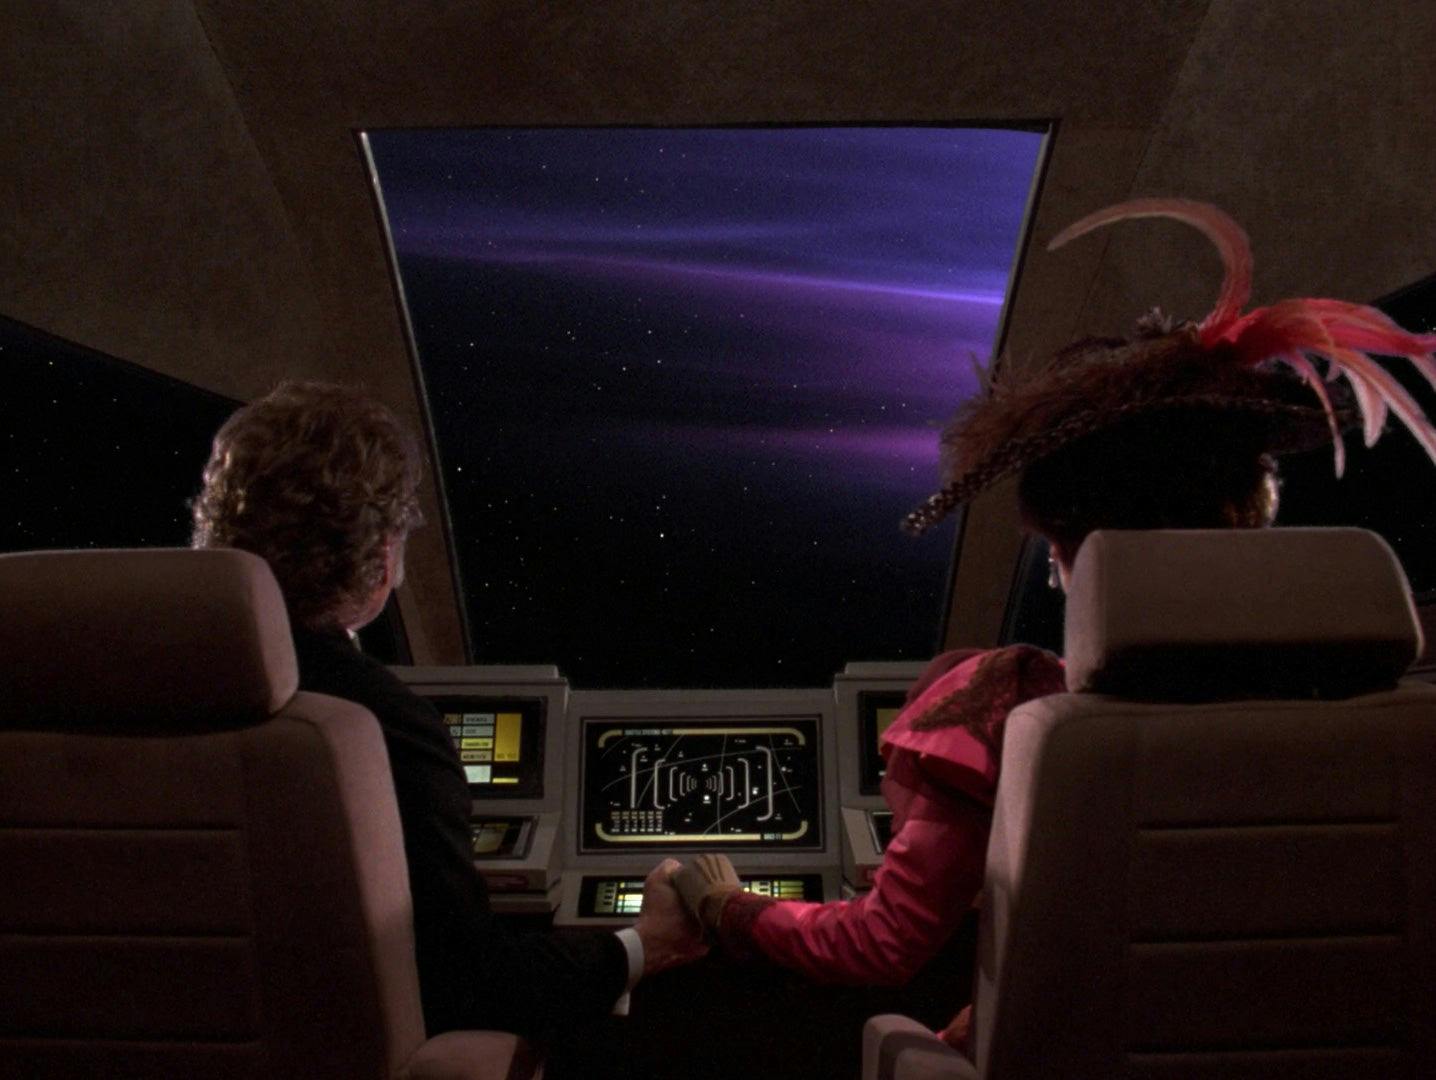 Professor Moriarty and his companion sit in a shuttle holding hands as they look out on the horizon ahead of them